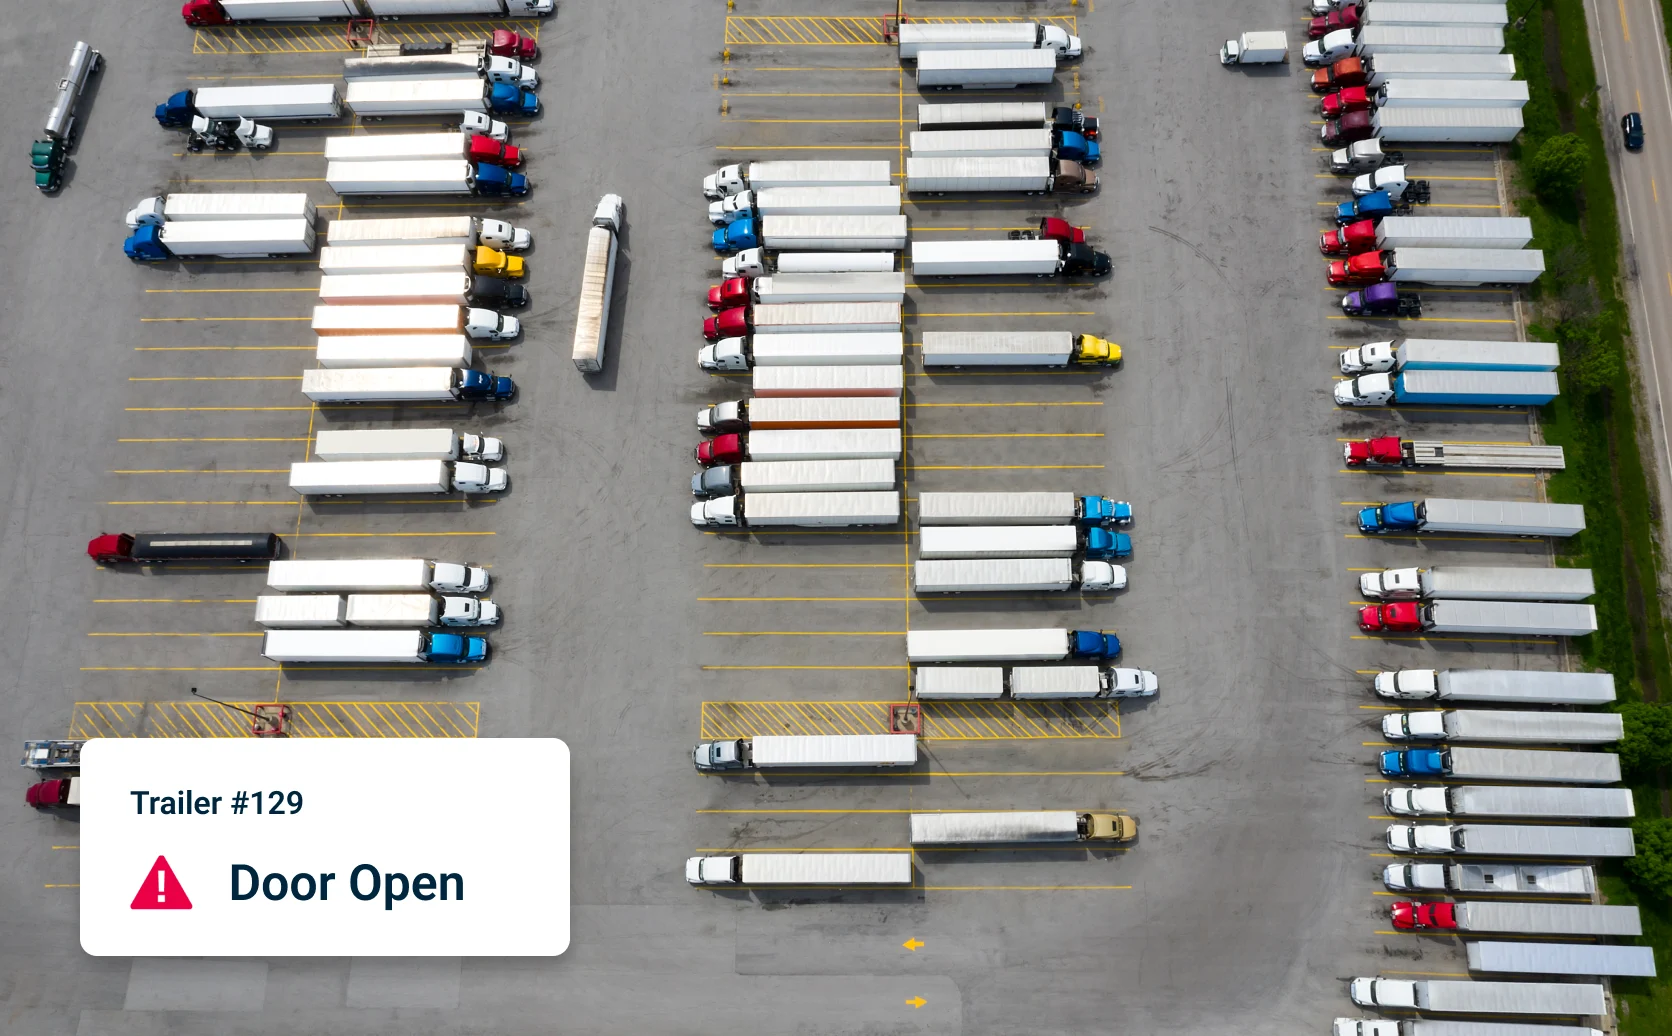 Aerial view shows parking lot full of semi-trailer trucks with overlay showing intelligent alert of: Trailer #129 Door Open